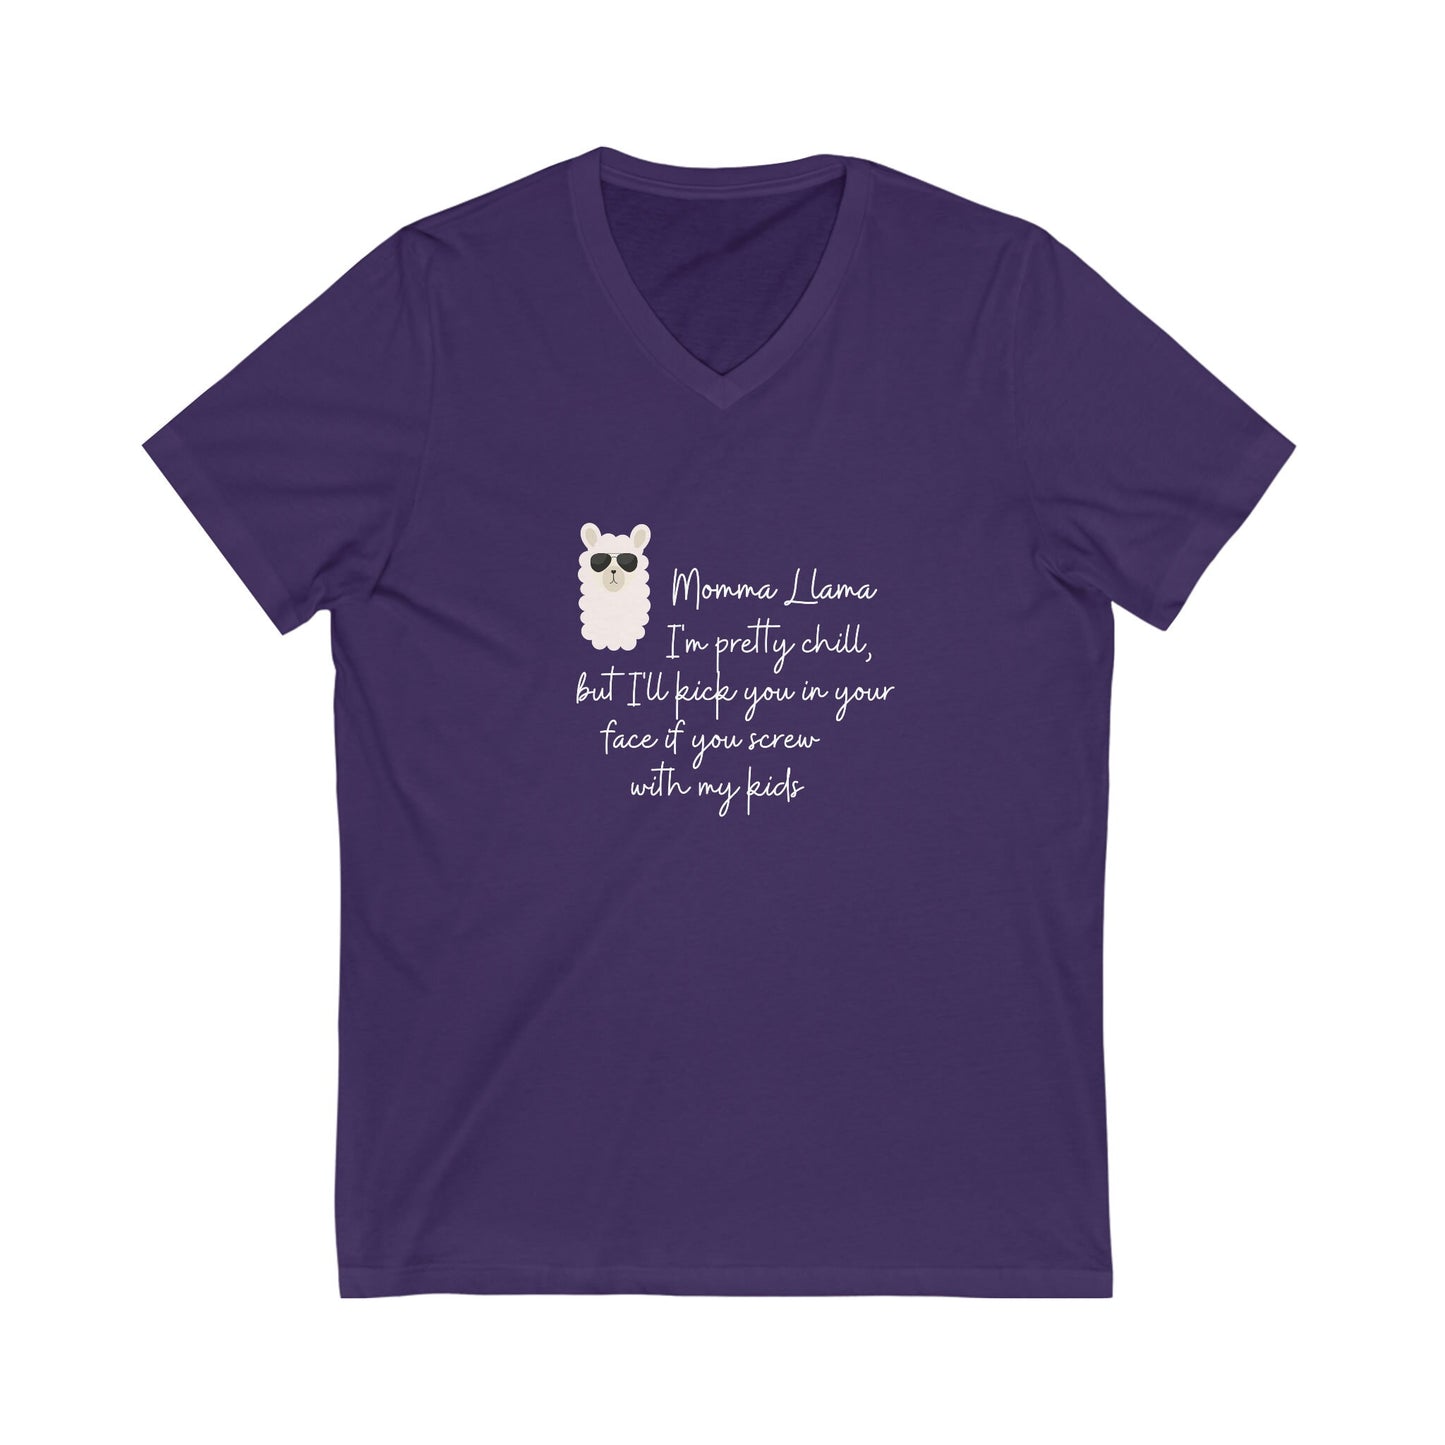 Momma Llama Jersey Short Sleeve V-Neck Tee - Extended sizes - Choice of colors